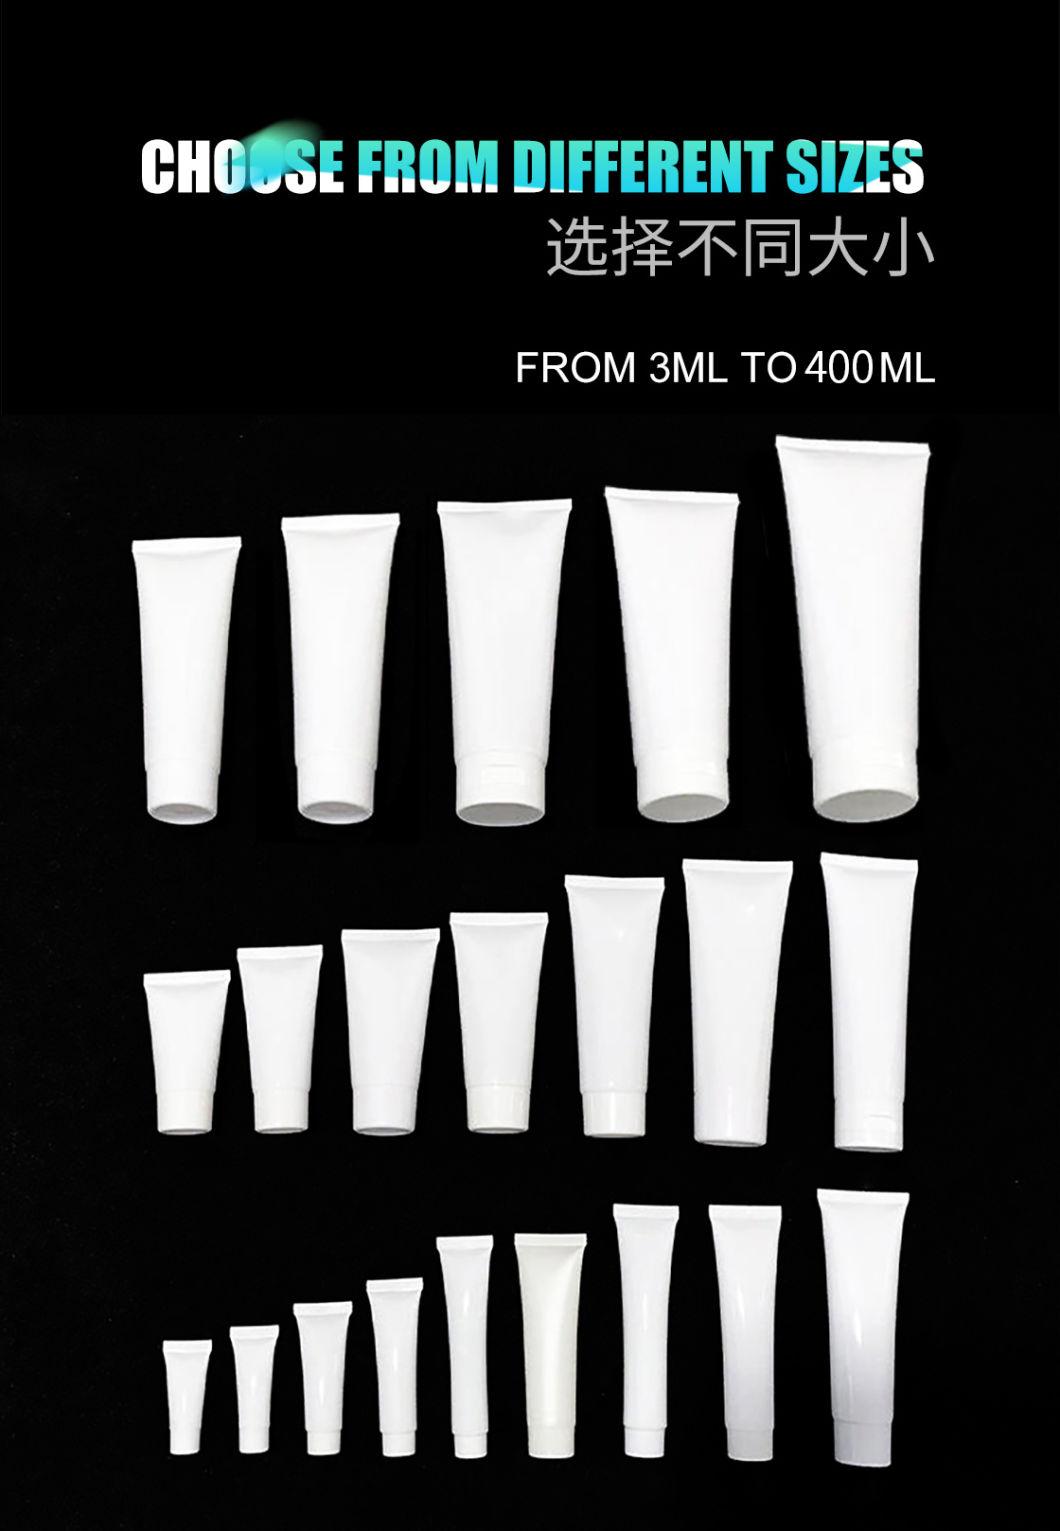 Cosmetic Soft Tube Supplier Cosmetics Packaging Sugarcane Plastic Plastic High Quality China Free Stock Samples Round